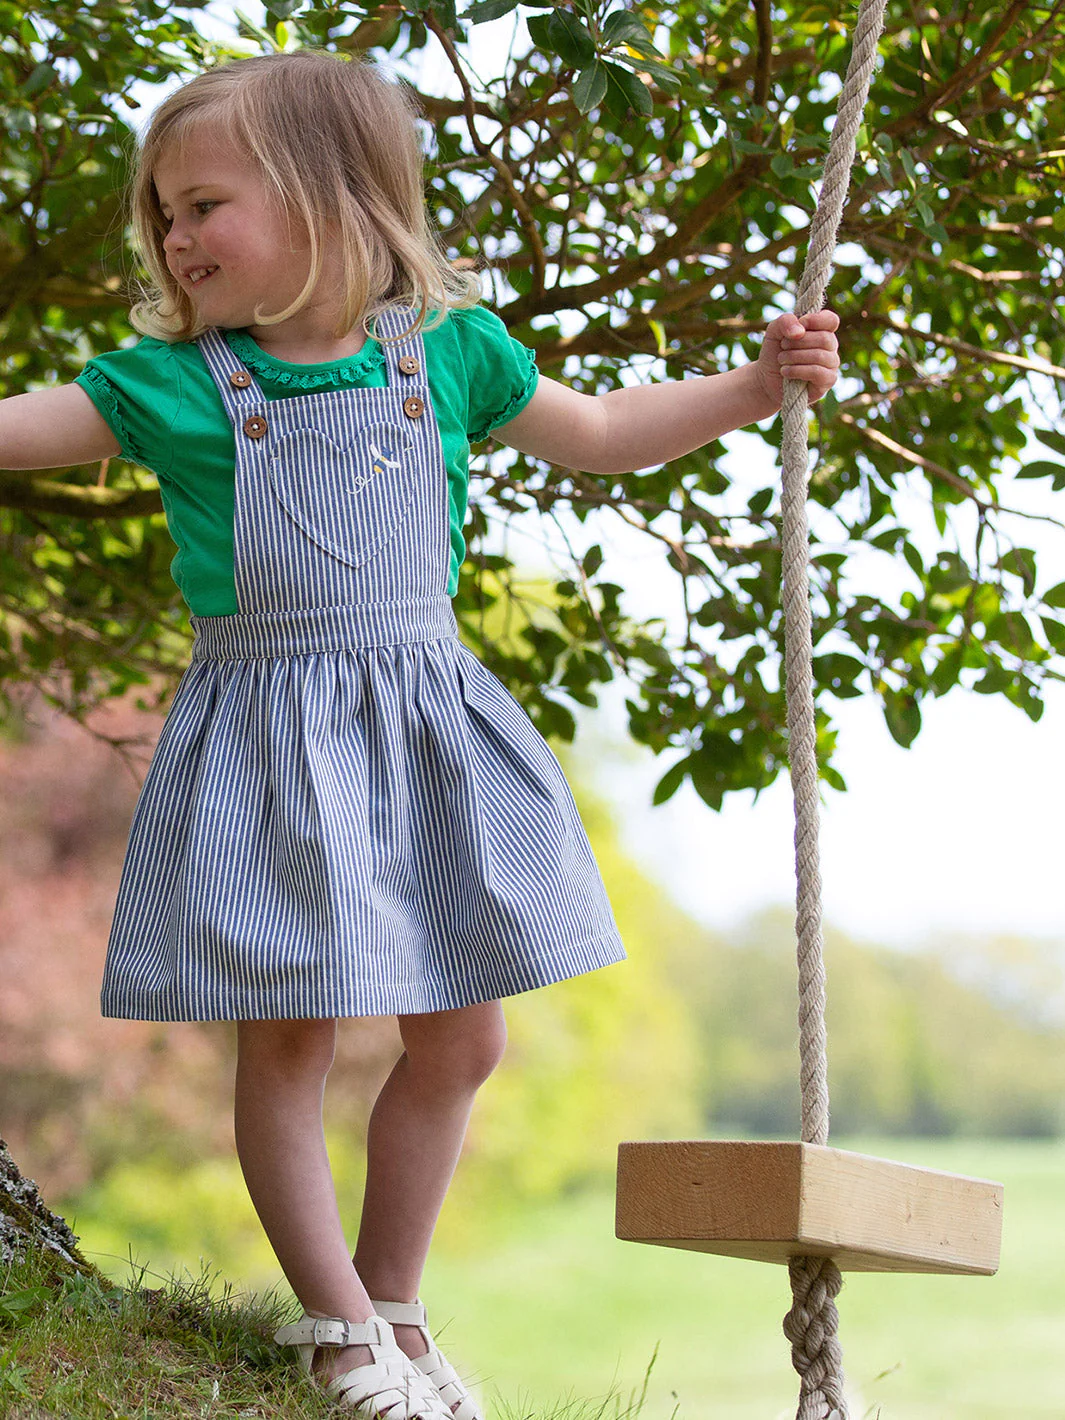 Bumble Pinafore by Kite